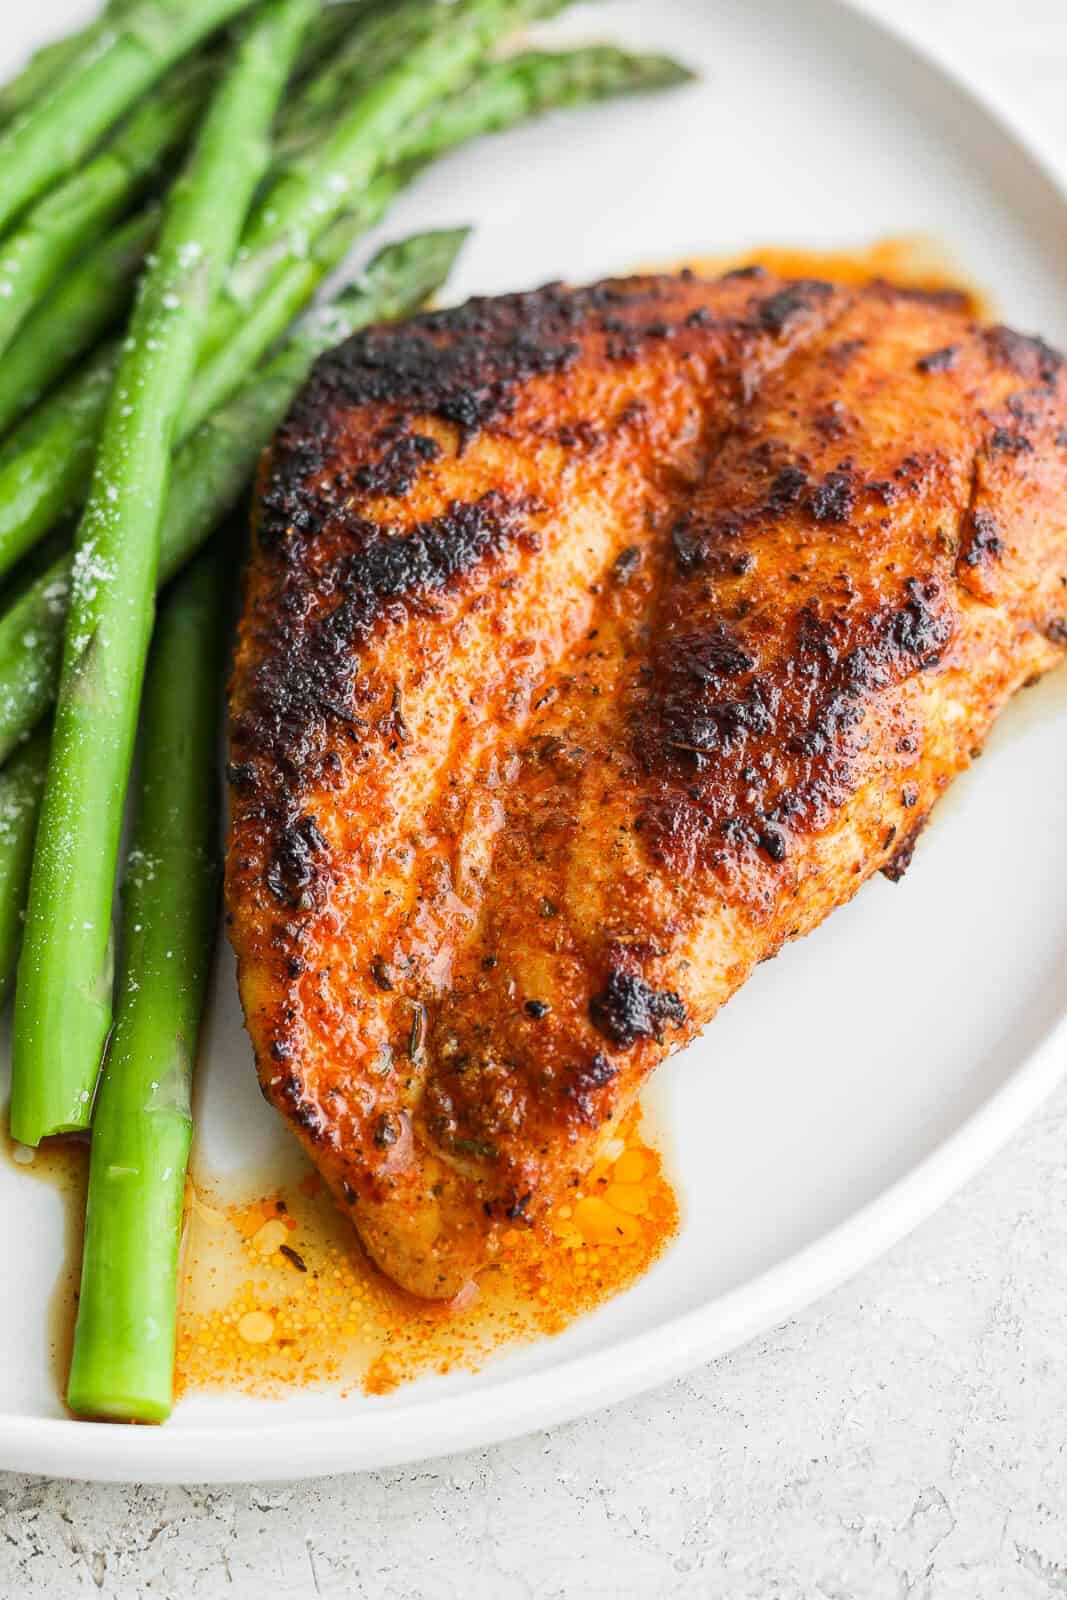 One blackened chicken breast on a plate with asparagus.